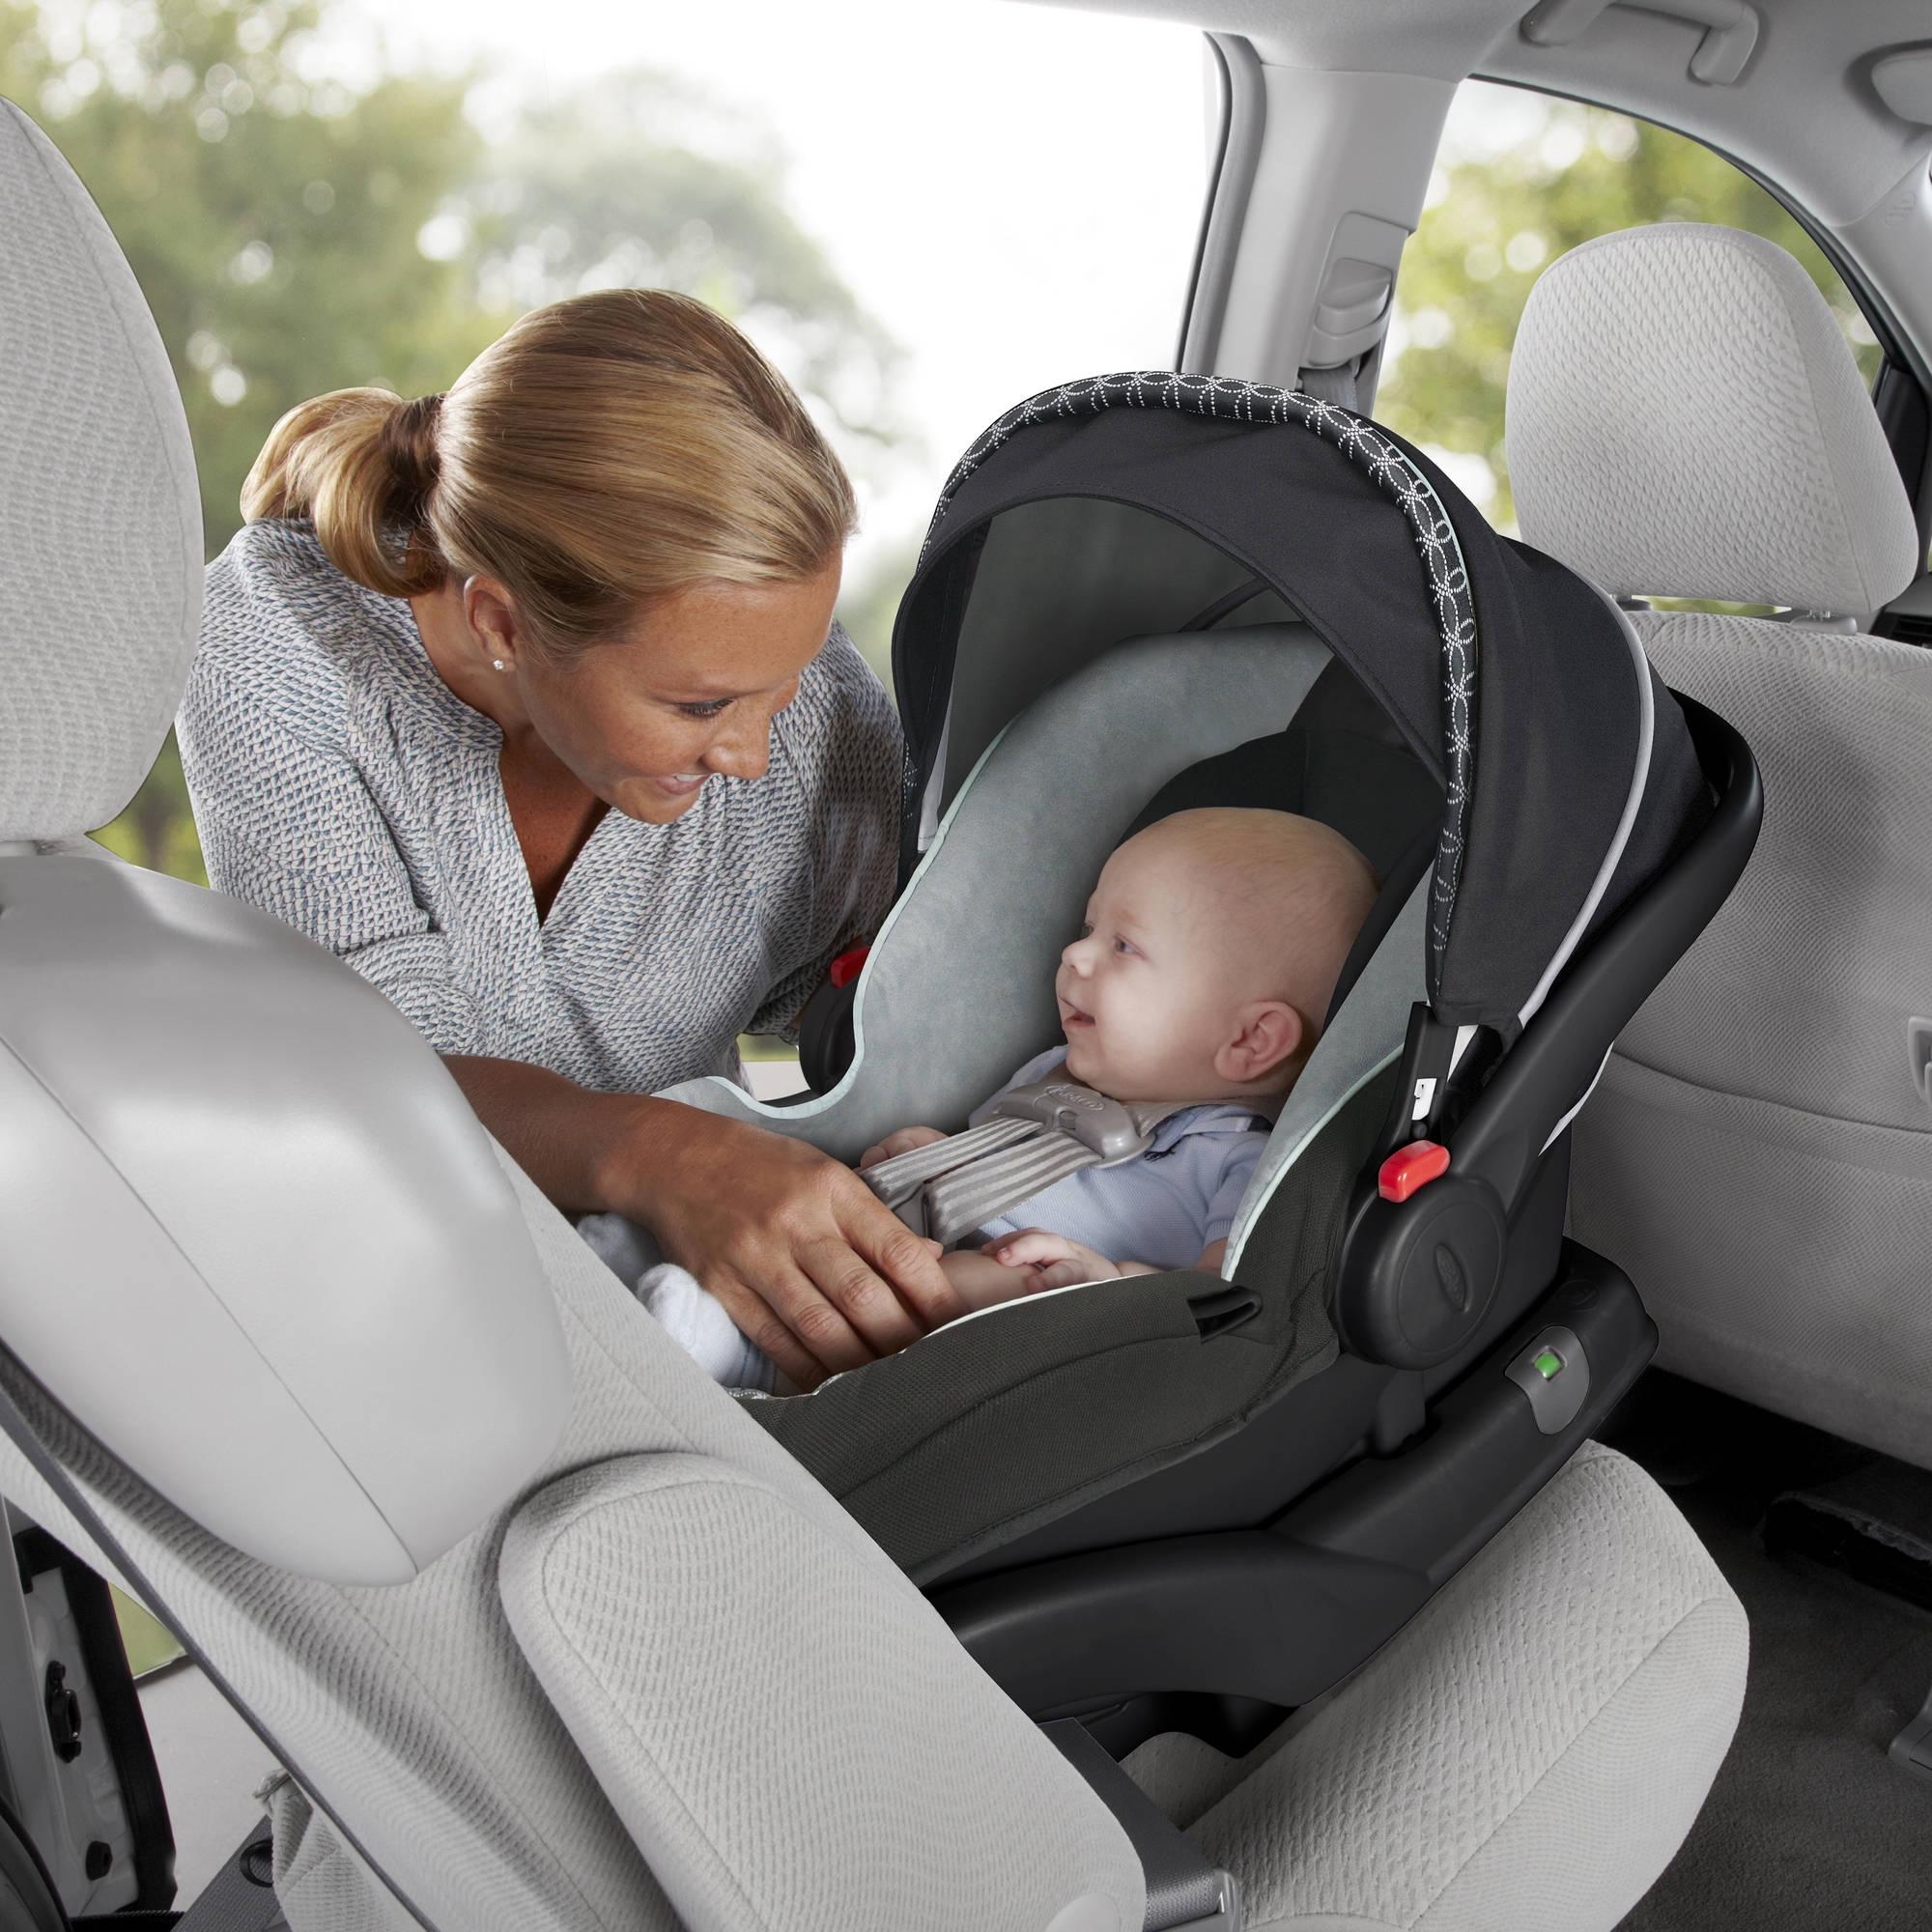 Baby Car Seat Development: Why it’s Important and What You Need to Know